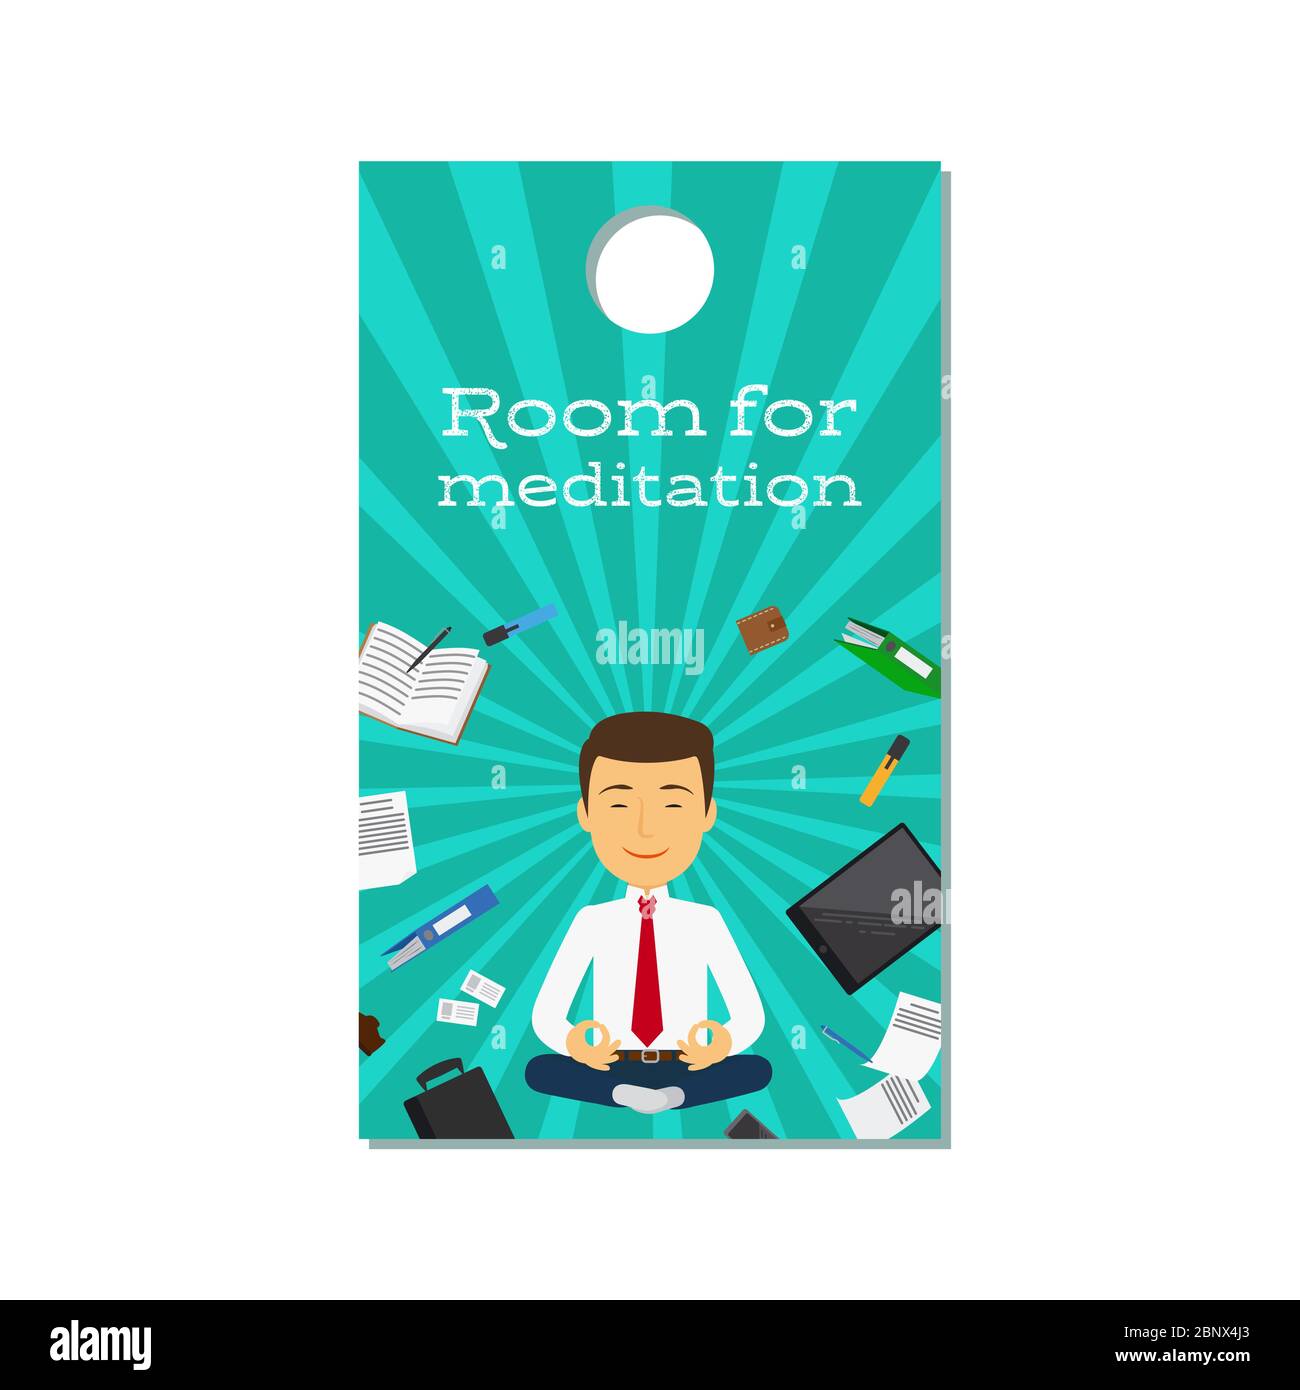 Room for meditation sign design for office door, isolated on white. Vector illustration Stock Vector